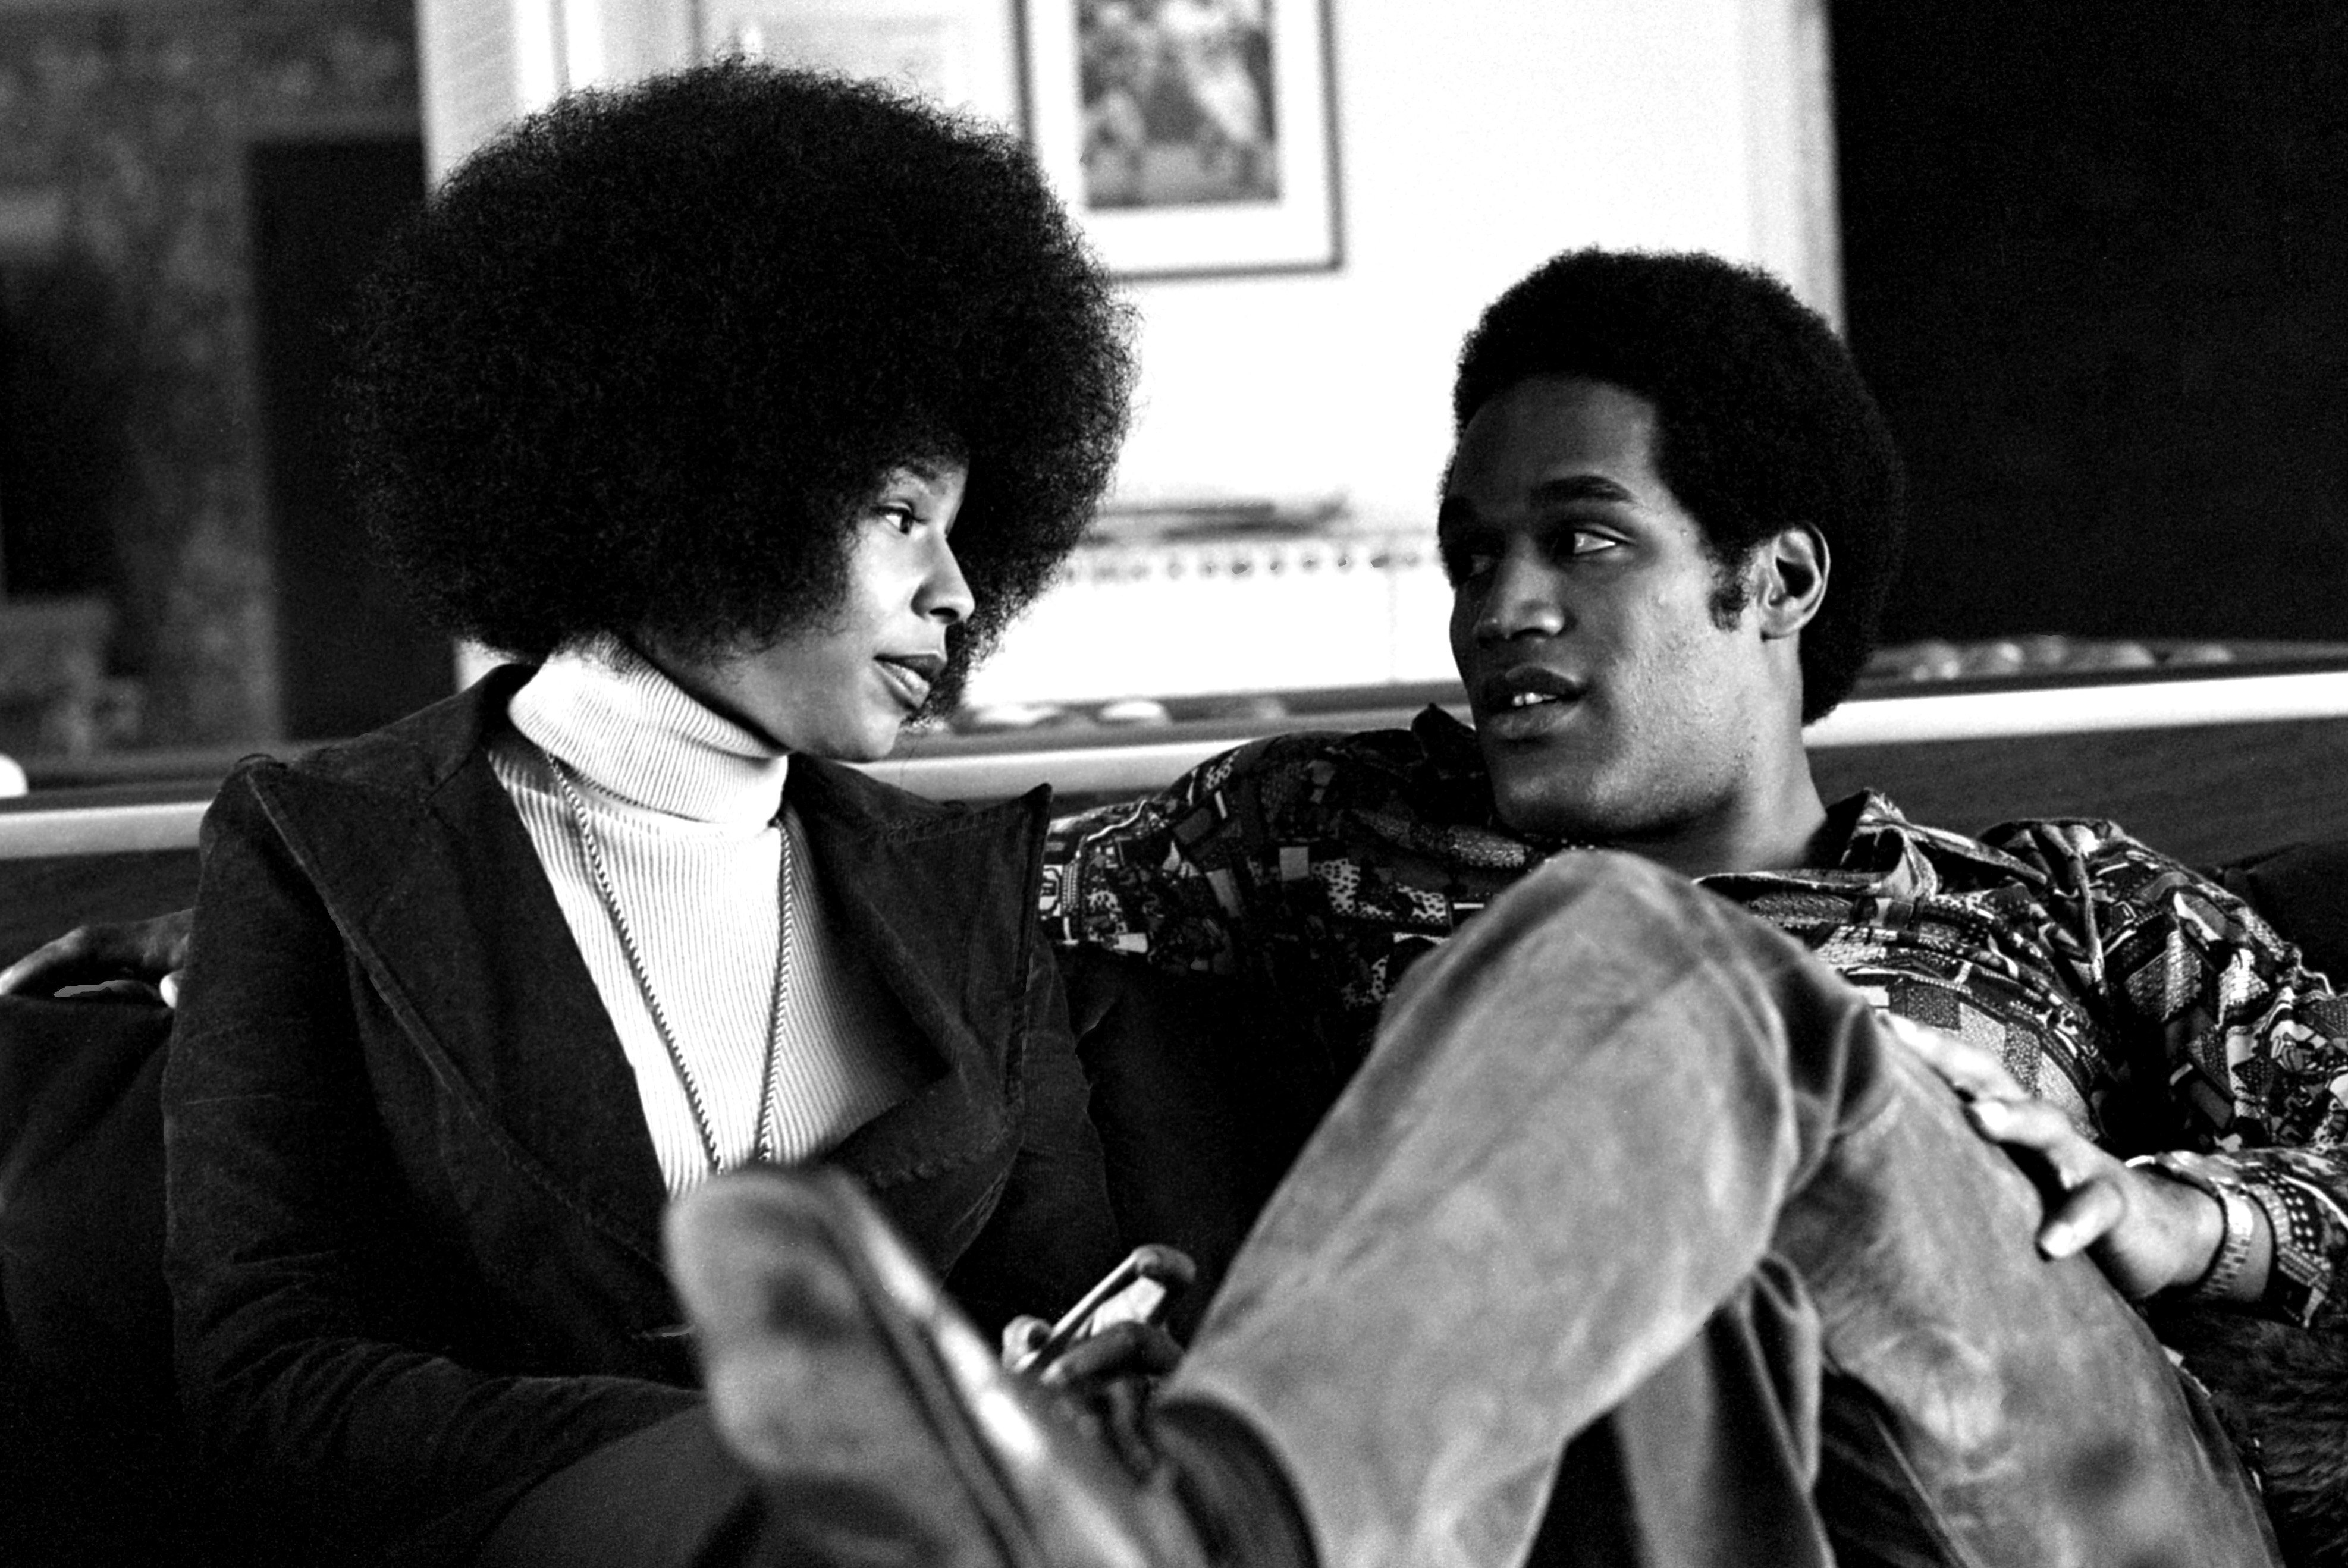 O.J. Simspson and Marguerite Whitley at home on January 8, 1973, in Los Angeles, California. | Source: Getty Images